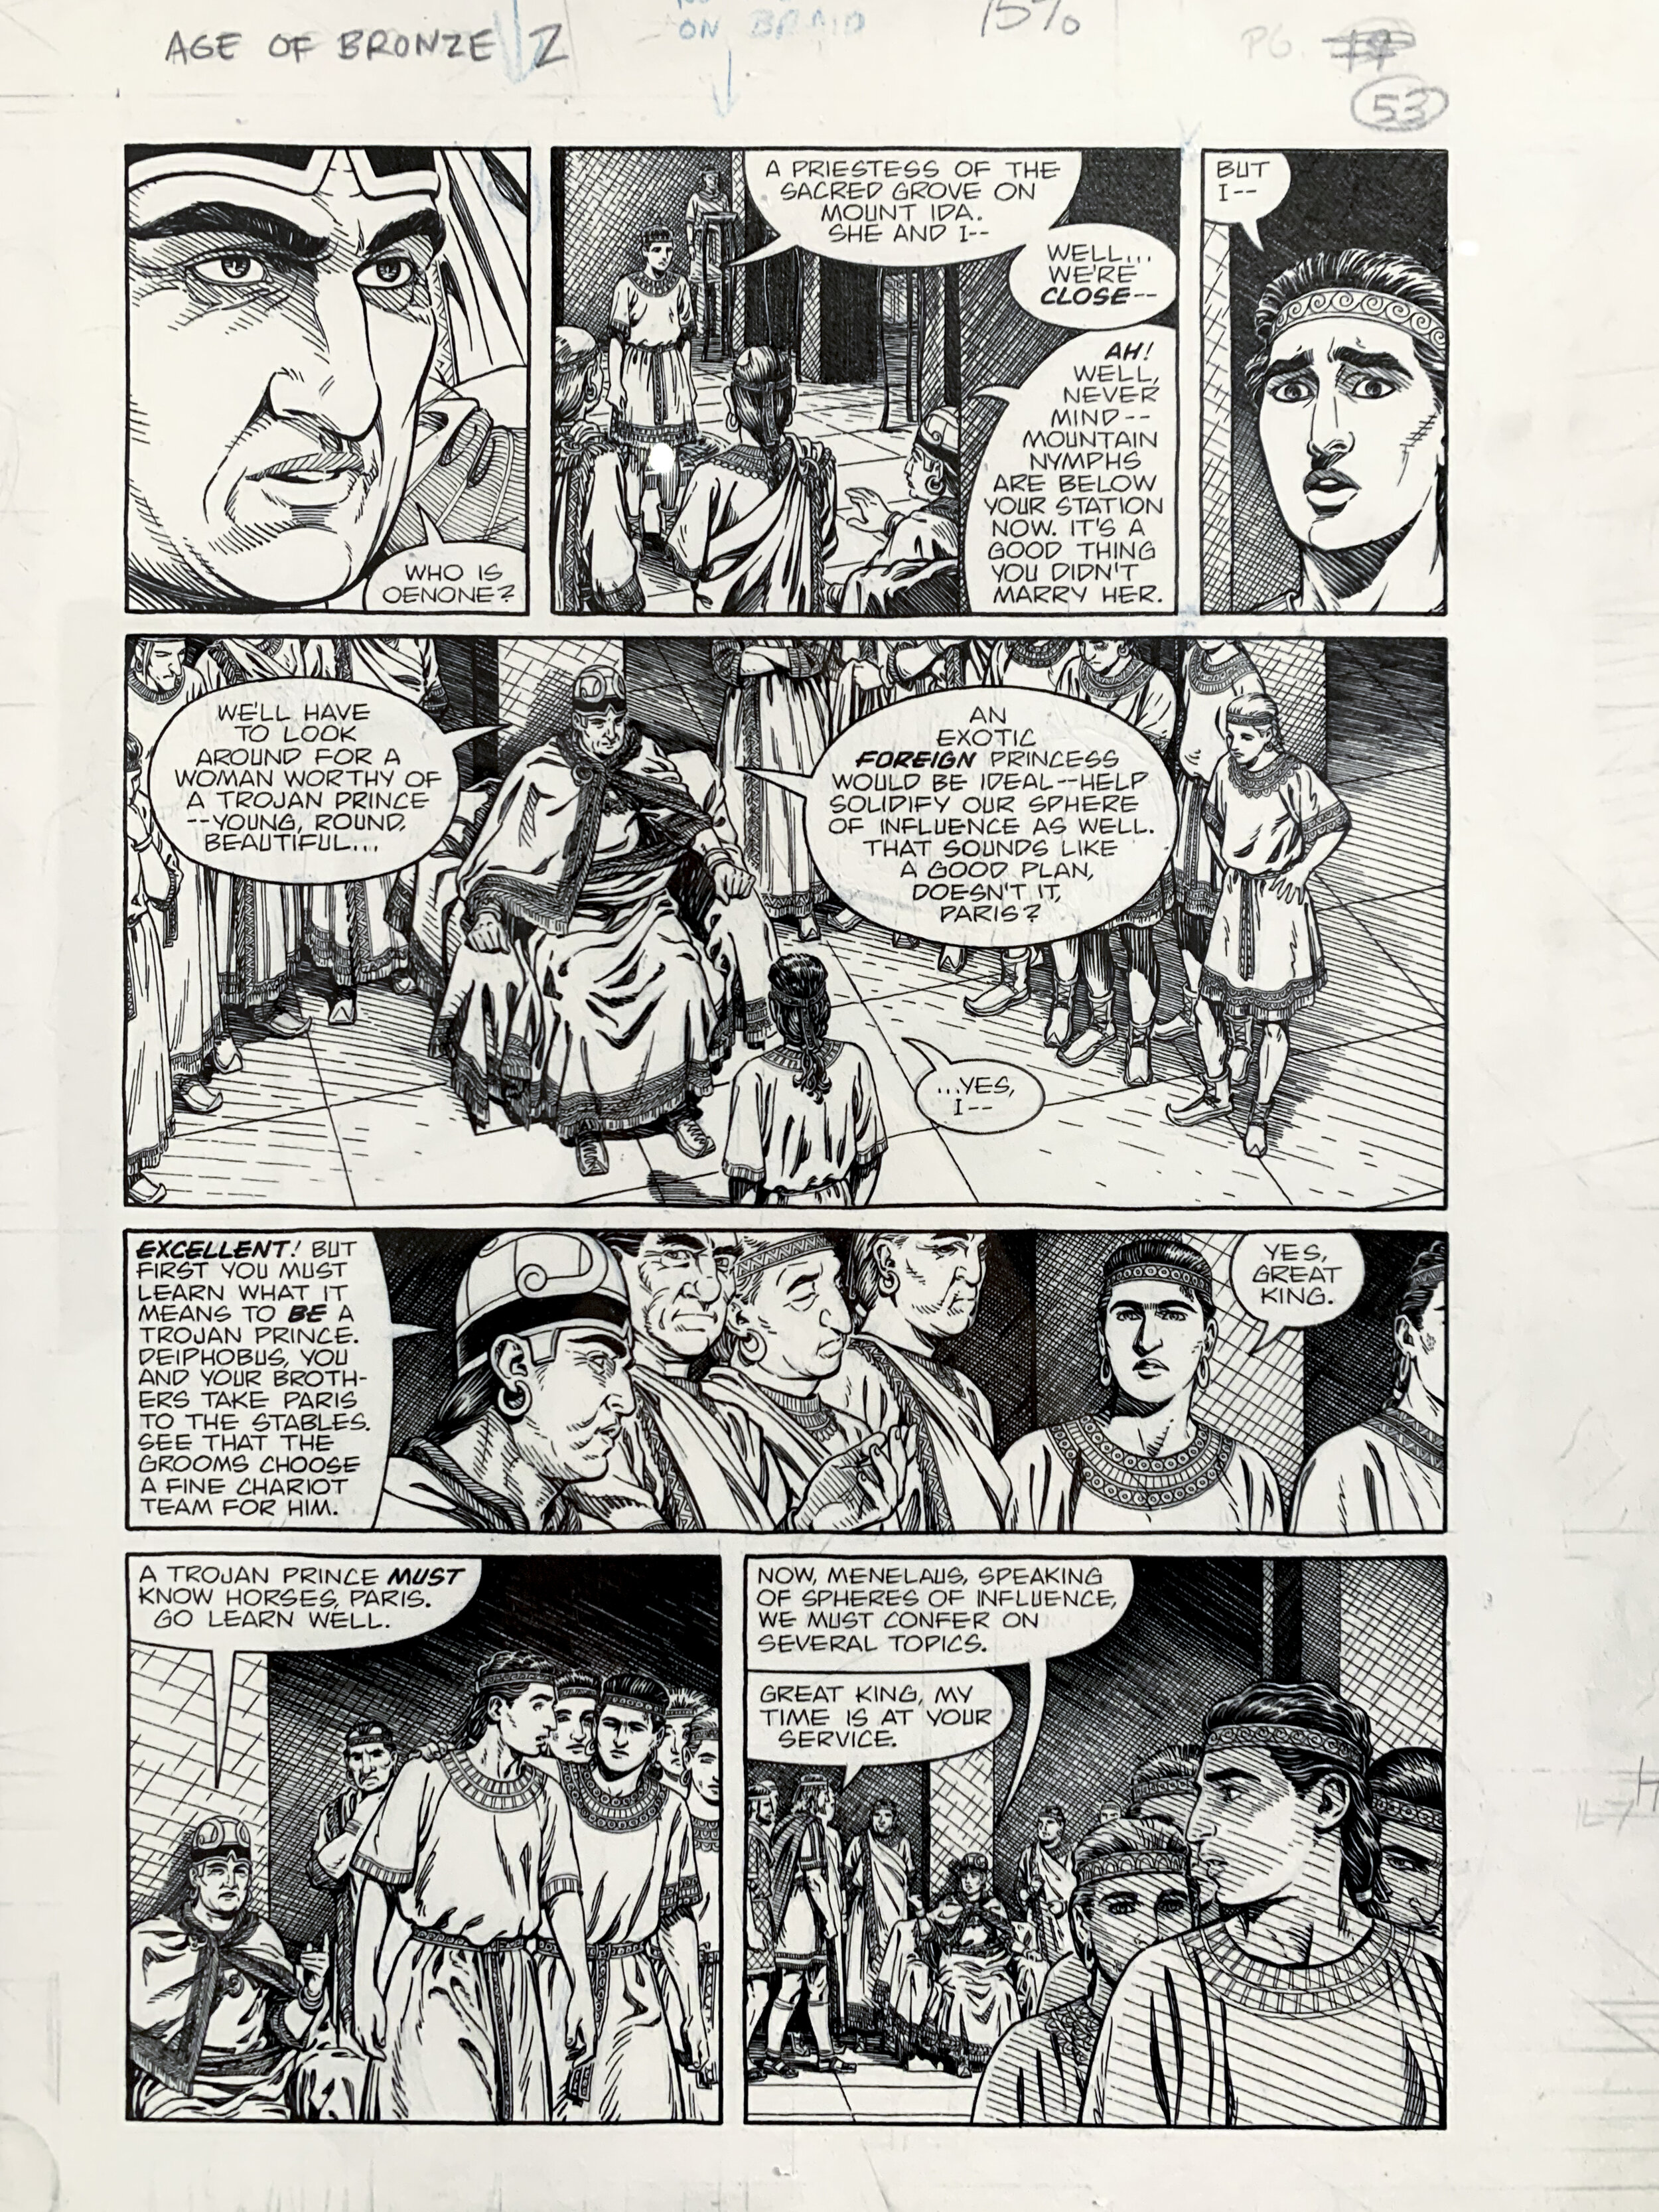   Eric Shanower     AGE OF BRONZE #2 (included in A THOUSAND SHIPS)   published by Image Comics, Jan 1999. pp 19, 1999  pen and india ink on Bristol board, notes in pencil 